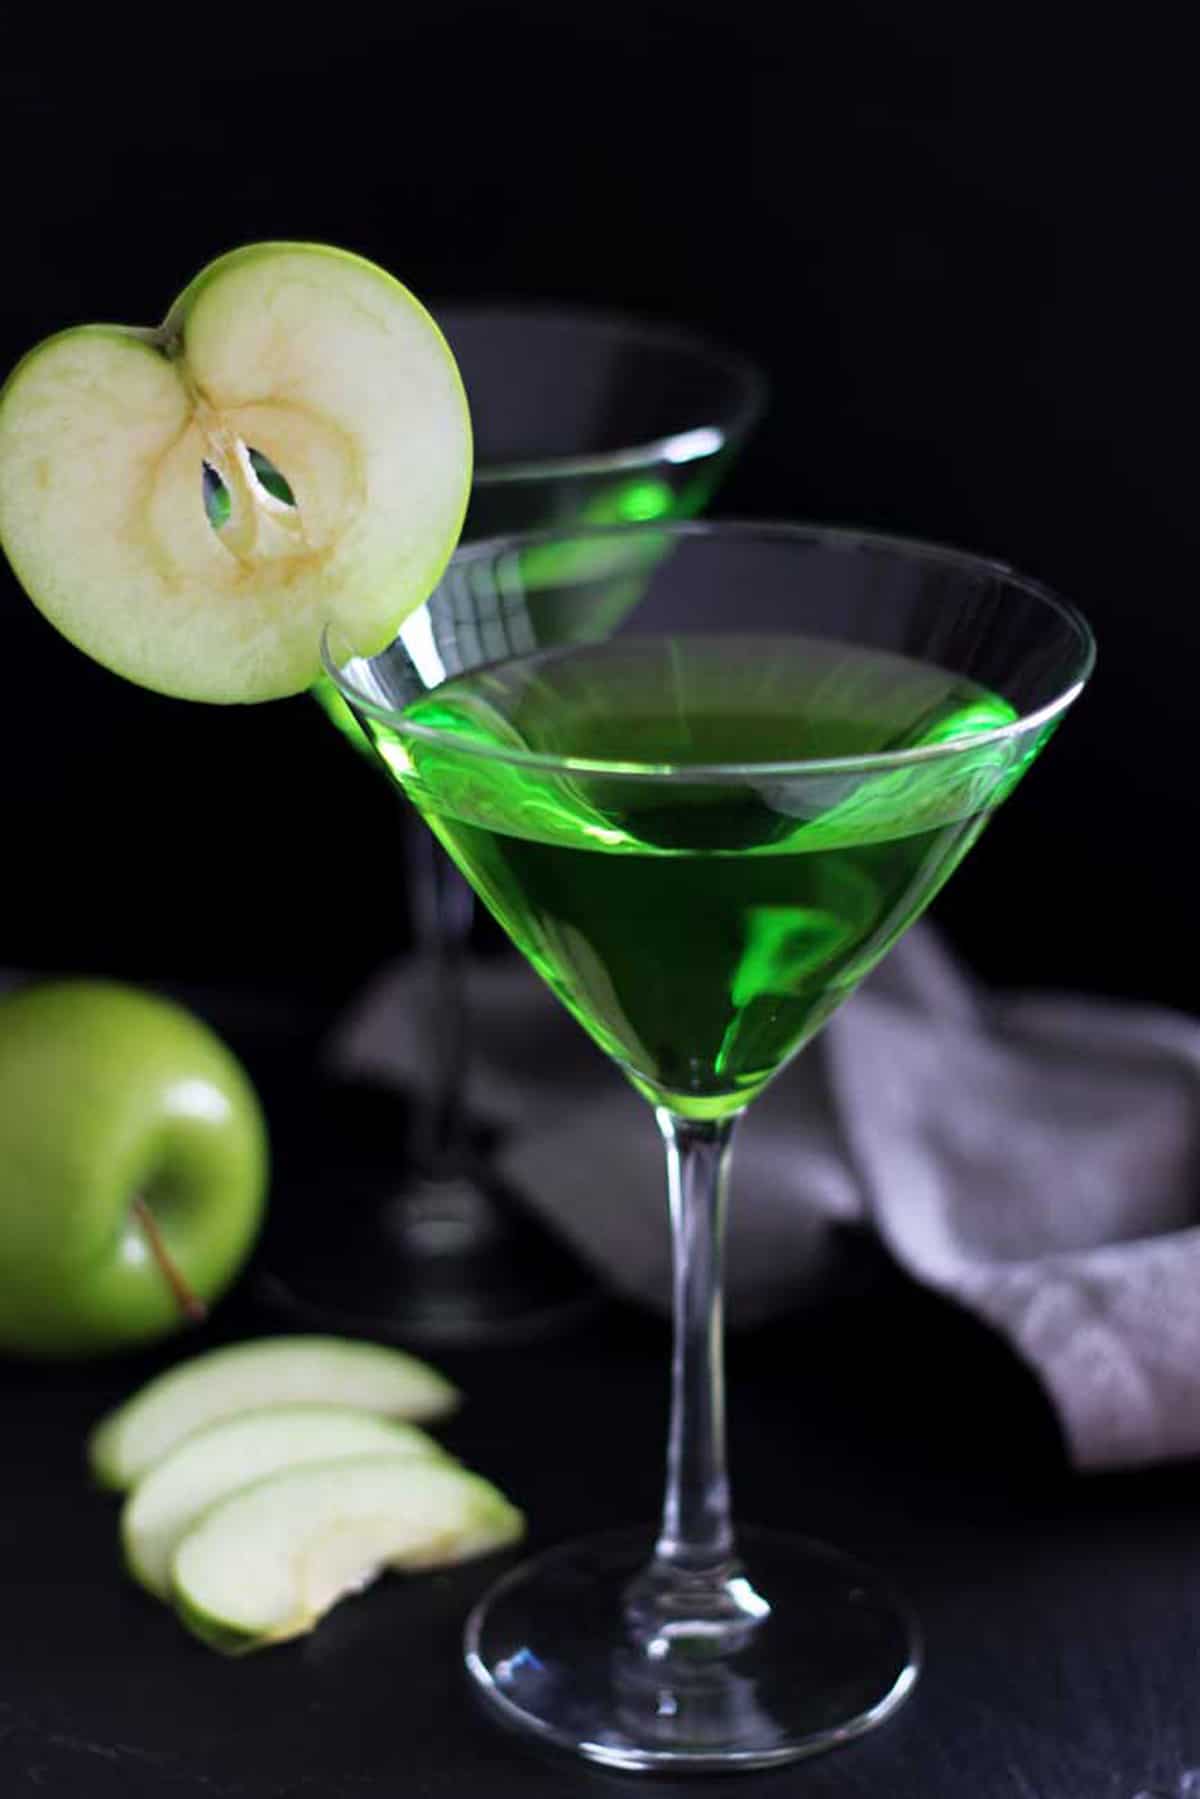 Two Martini glasses filled with a Green Apple Martini drink sitting on a black table, gray napkin and green apple slices in the background.